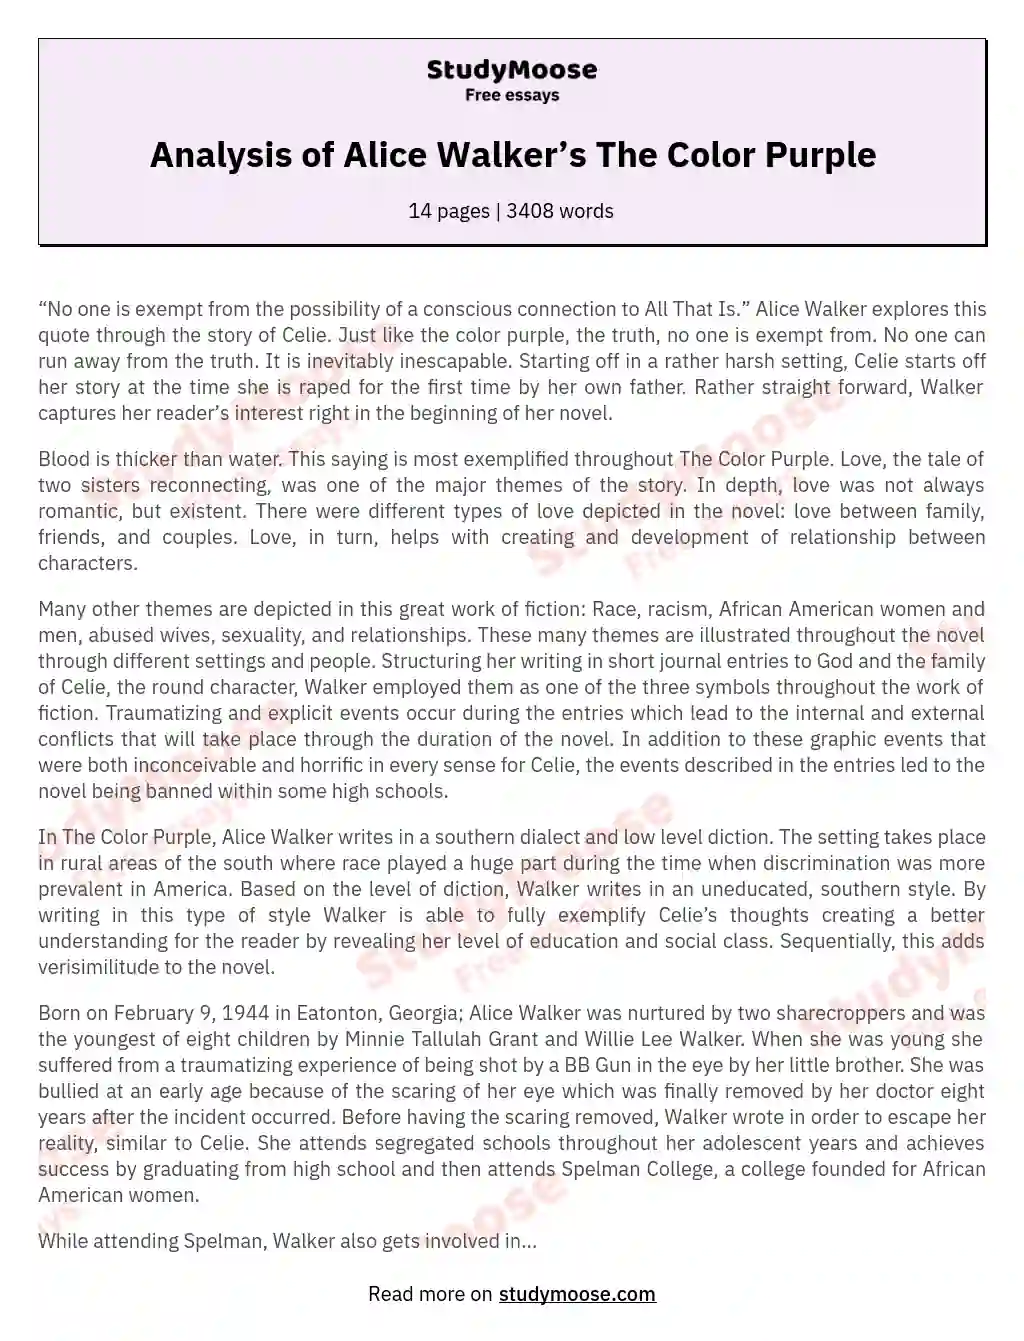 Analysis of Alice Walker’s The Color Purple